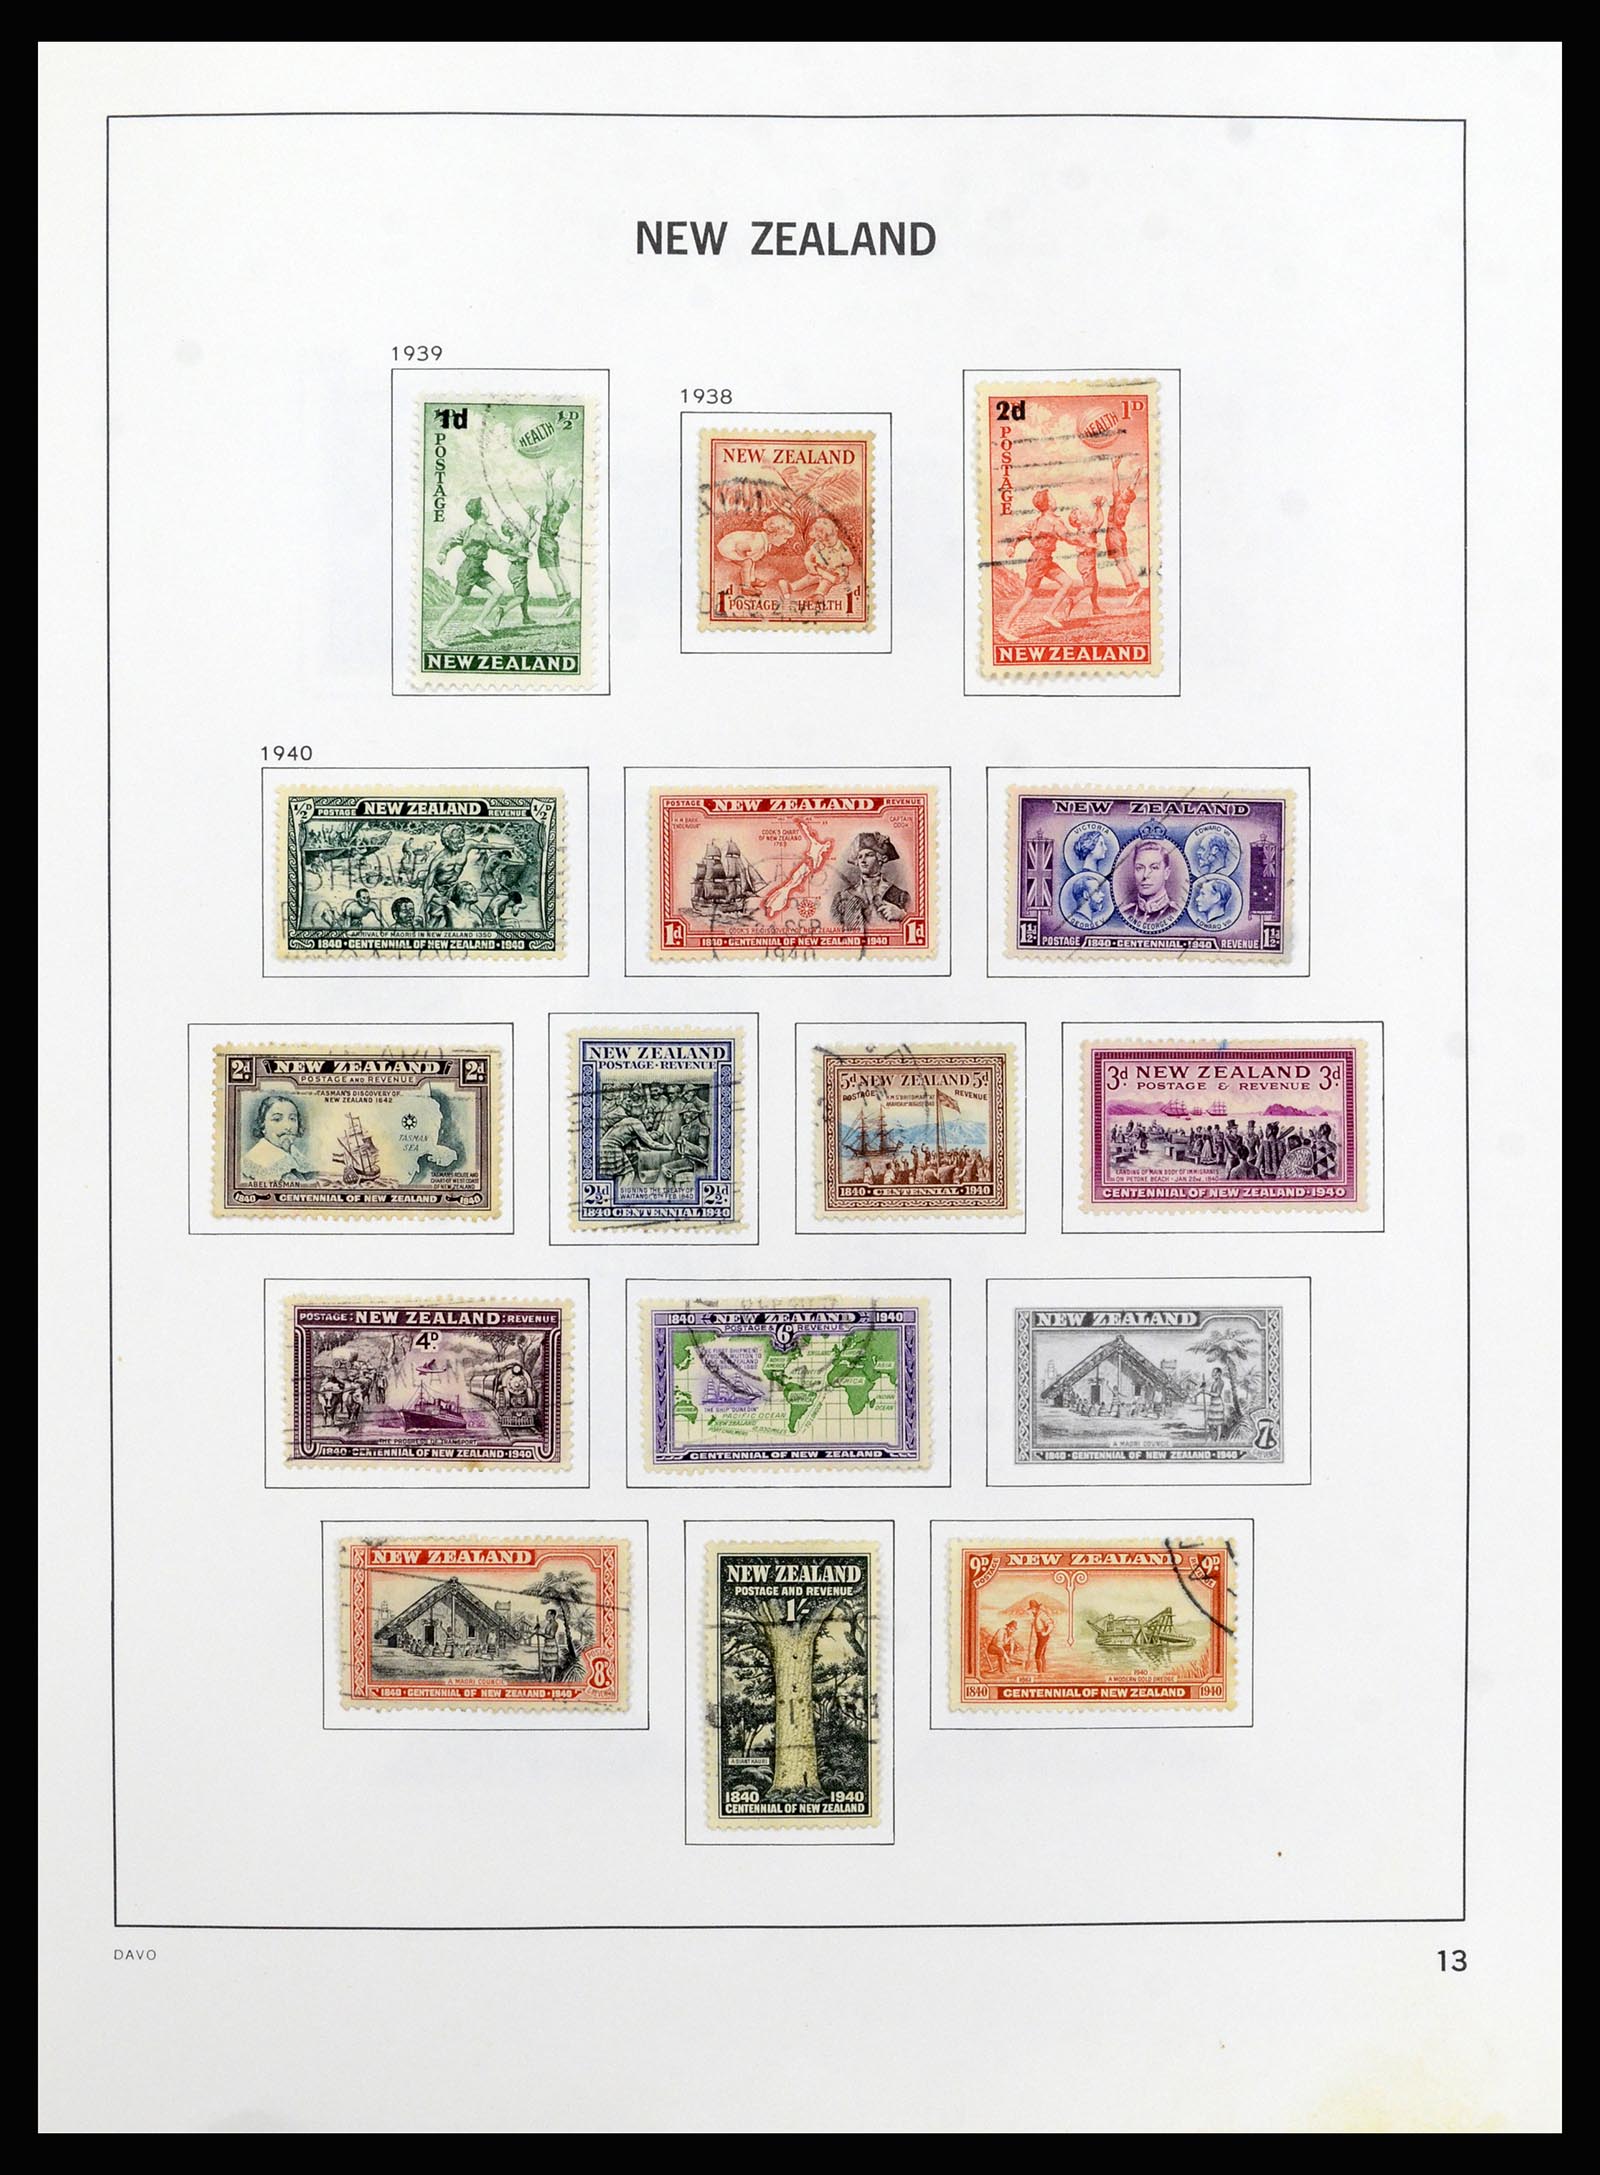 37209 014 - Stamp collection 37209 New Zealand 1855-1997.